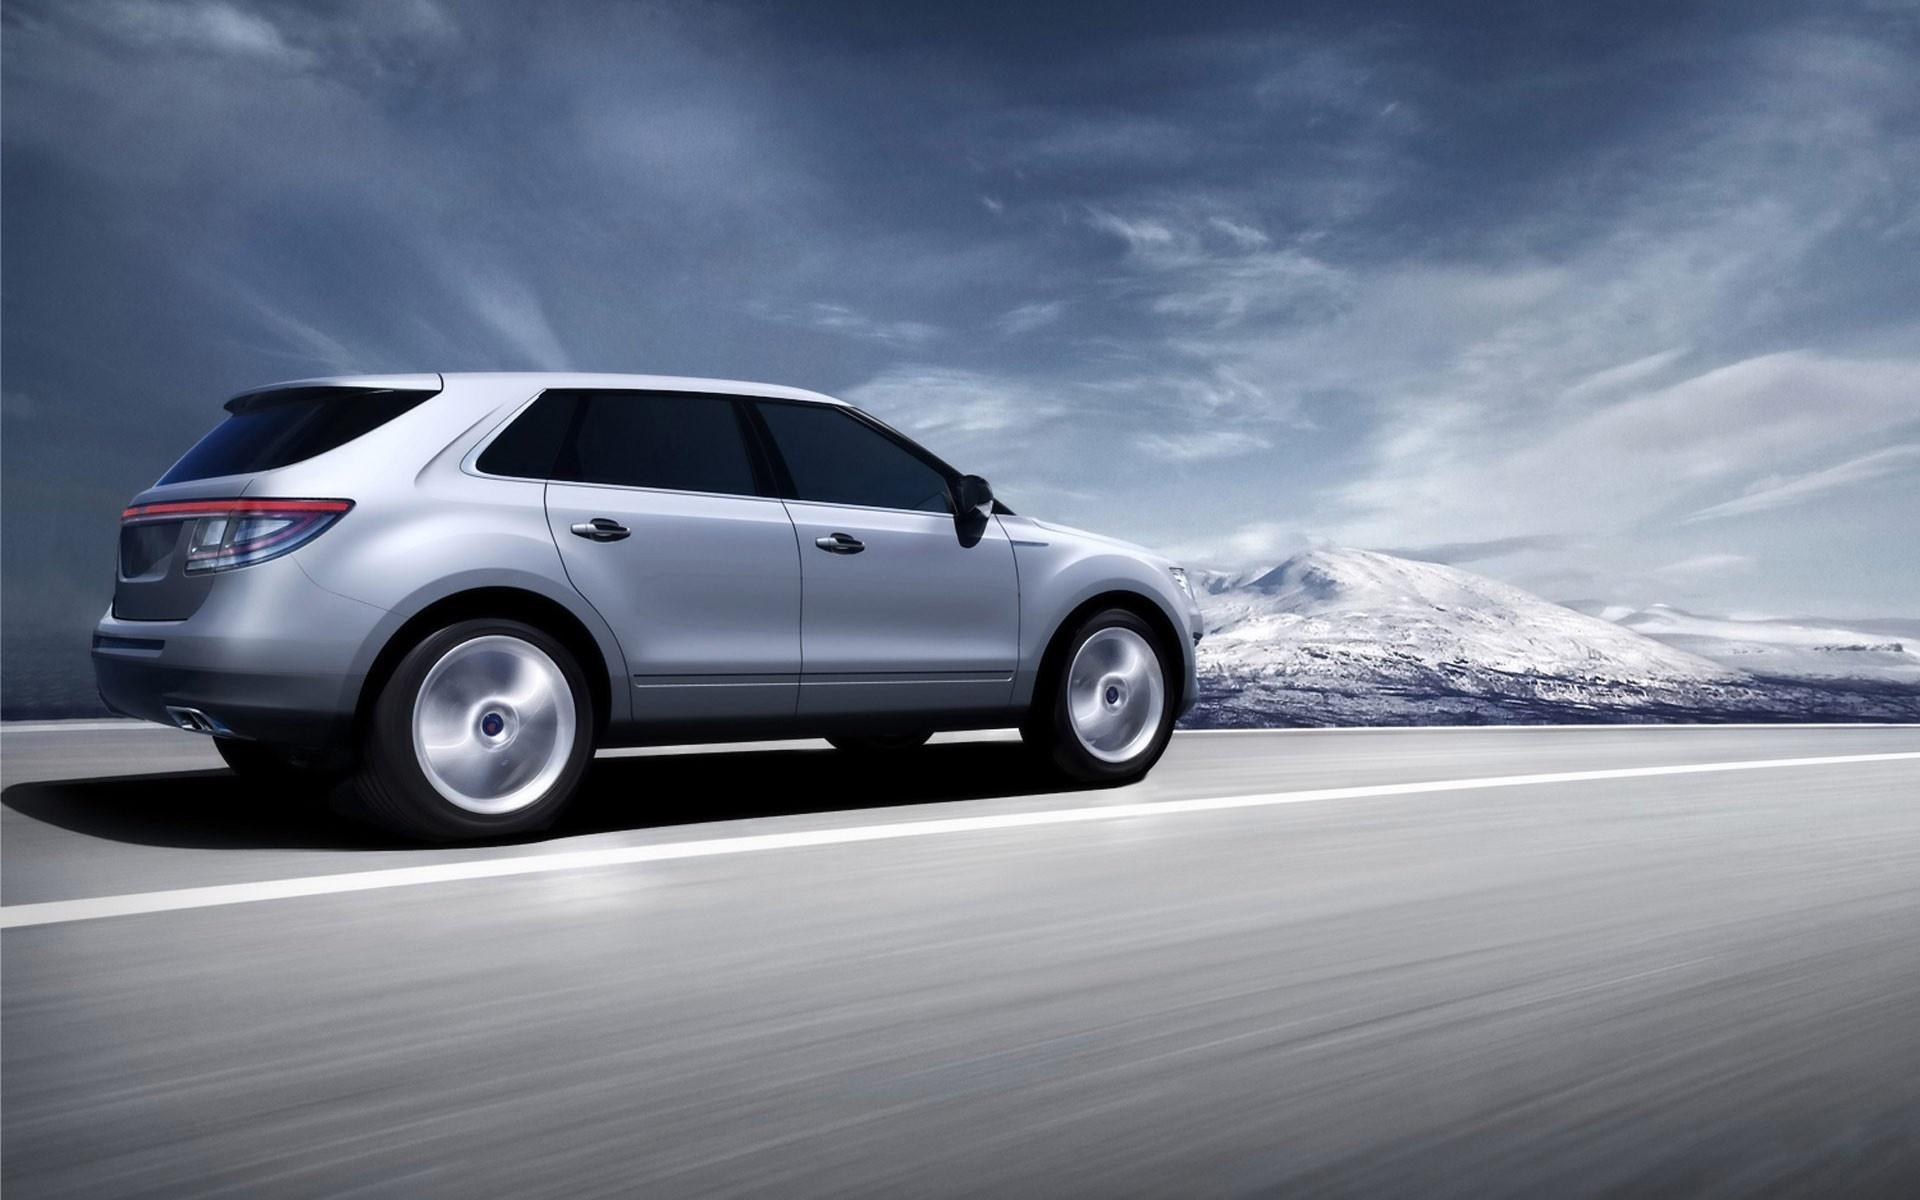 SUV wallpaper and image, picture, photo